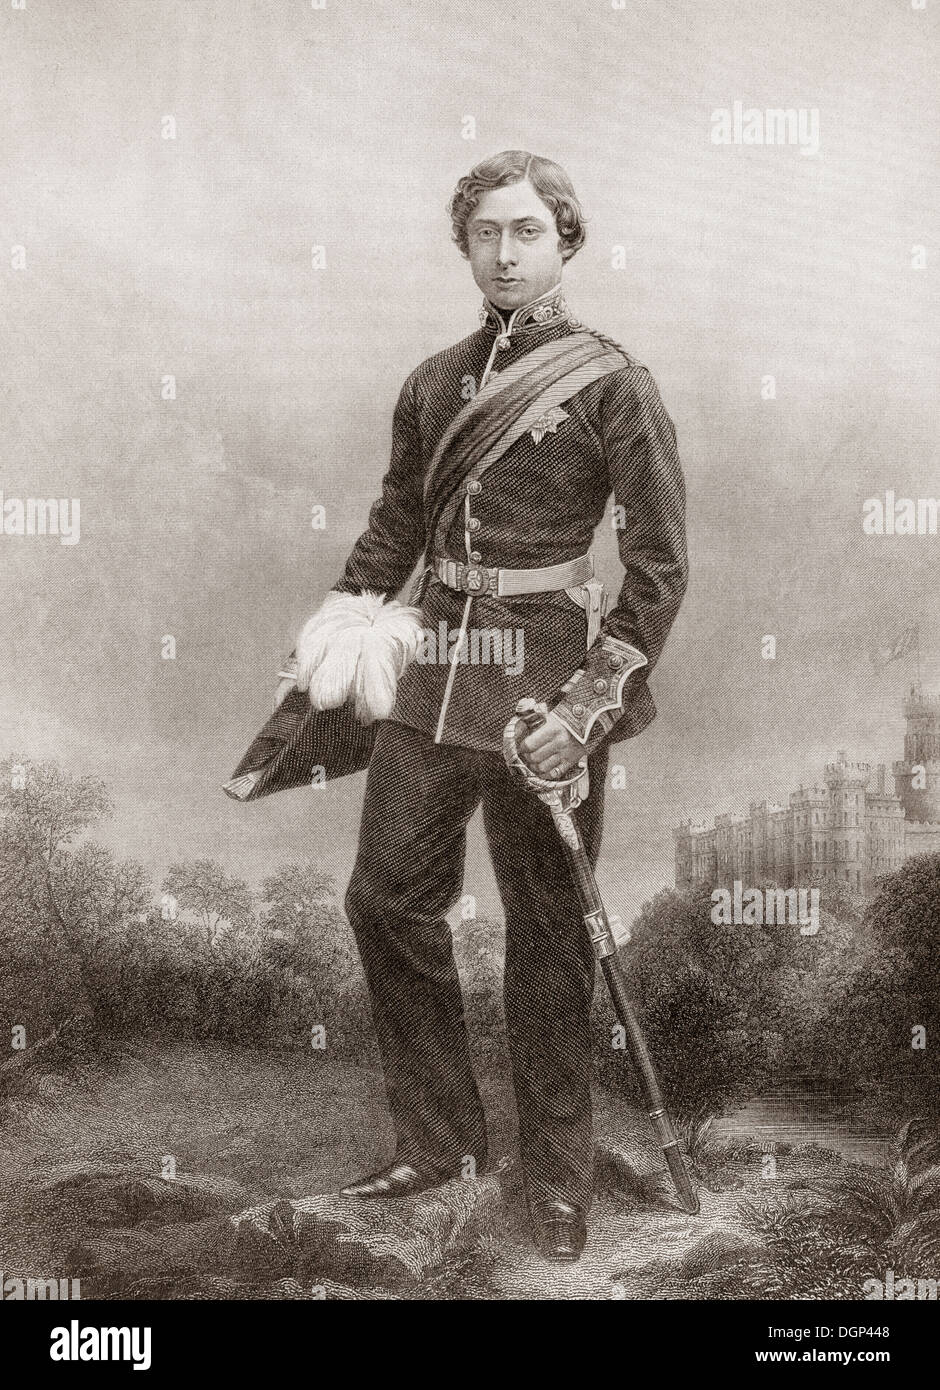 Albert Edward, Prince of Wales, 1841 – 1910, future King Edward VII, when appointed to the rank of colonel at age 18. Stock Photo